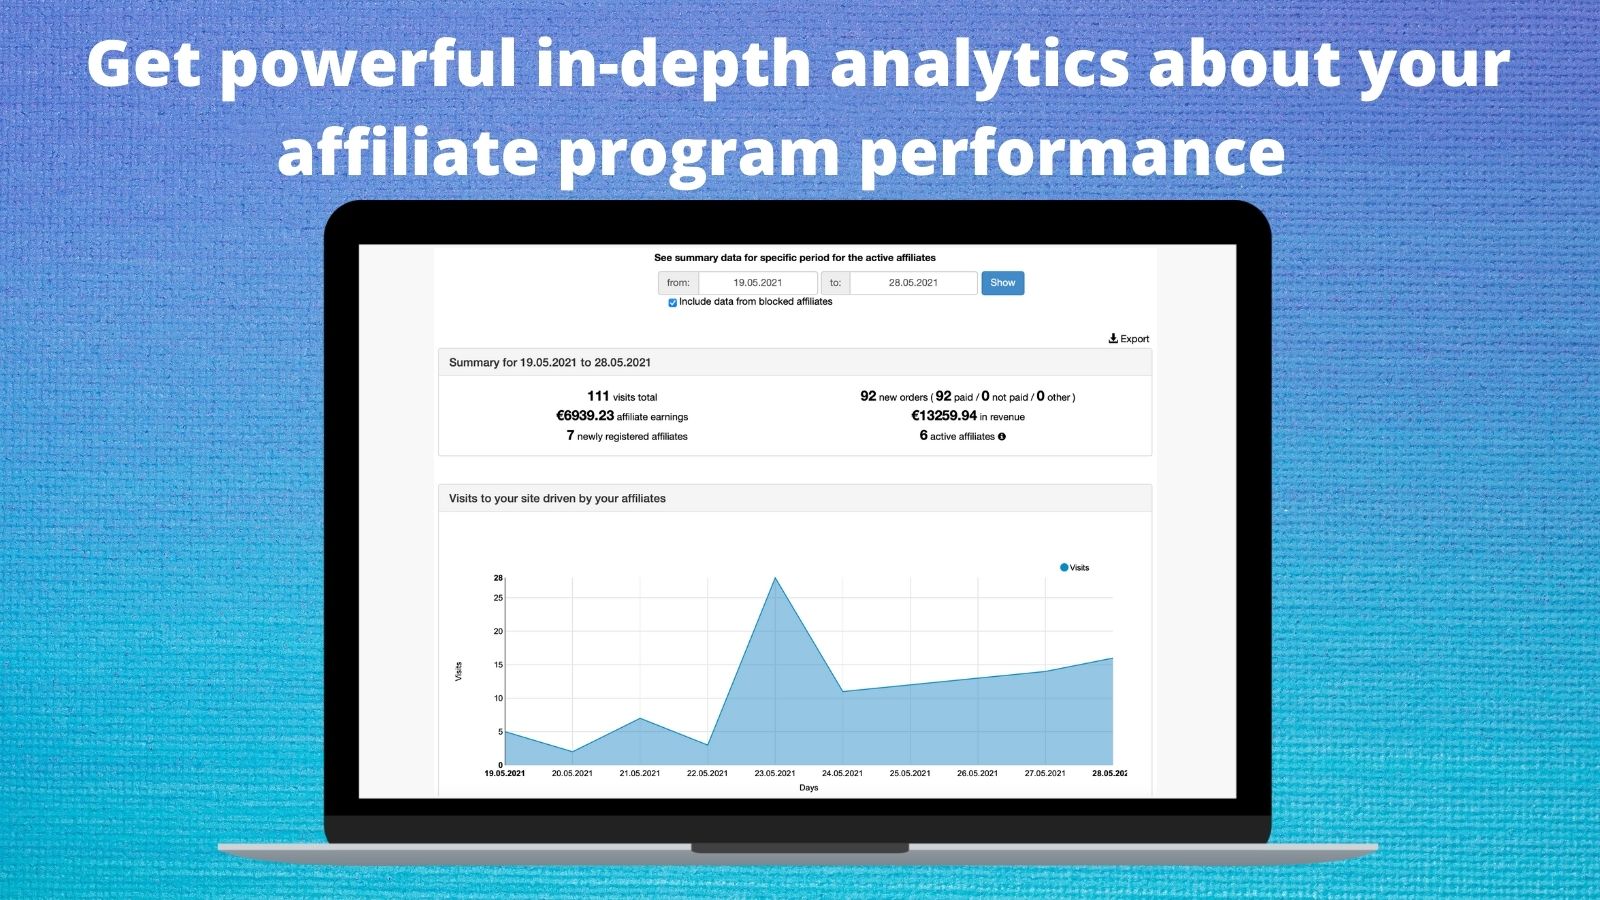 Get in-depth analytics about your affiliate program performance